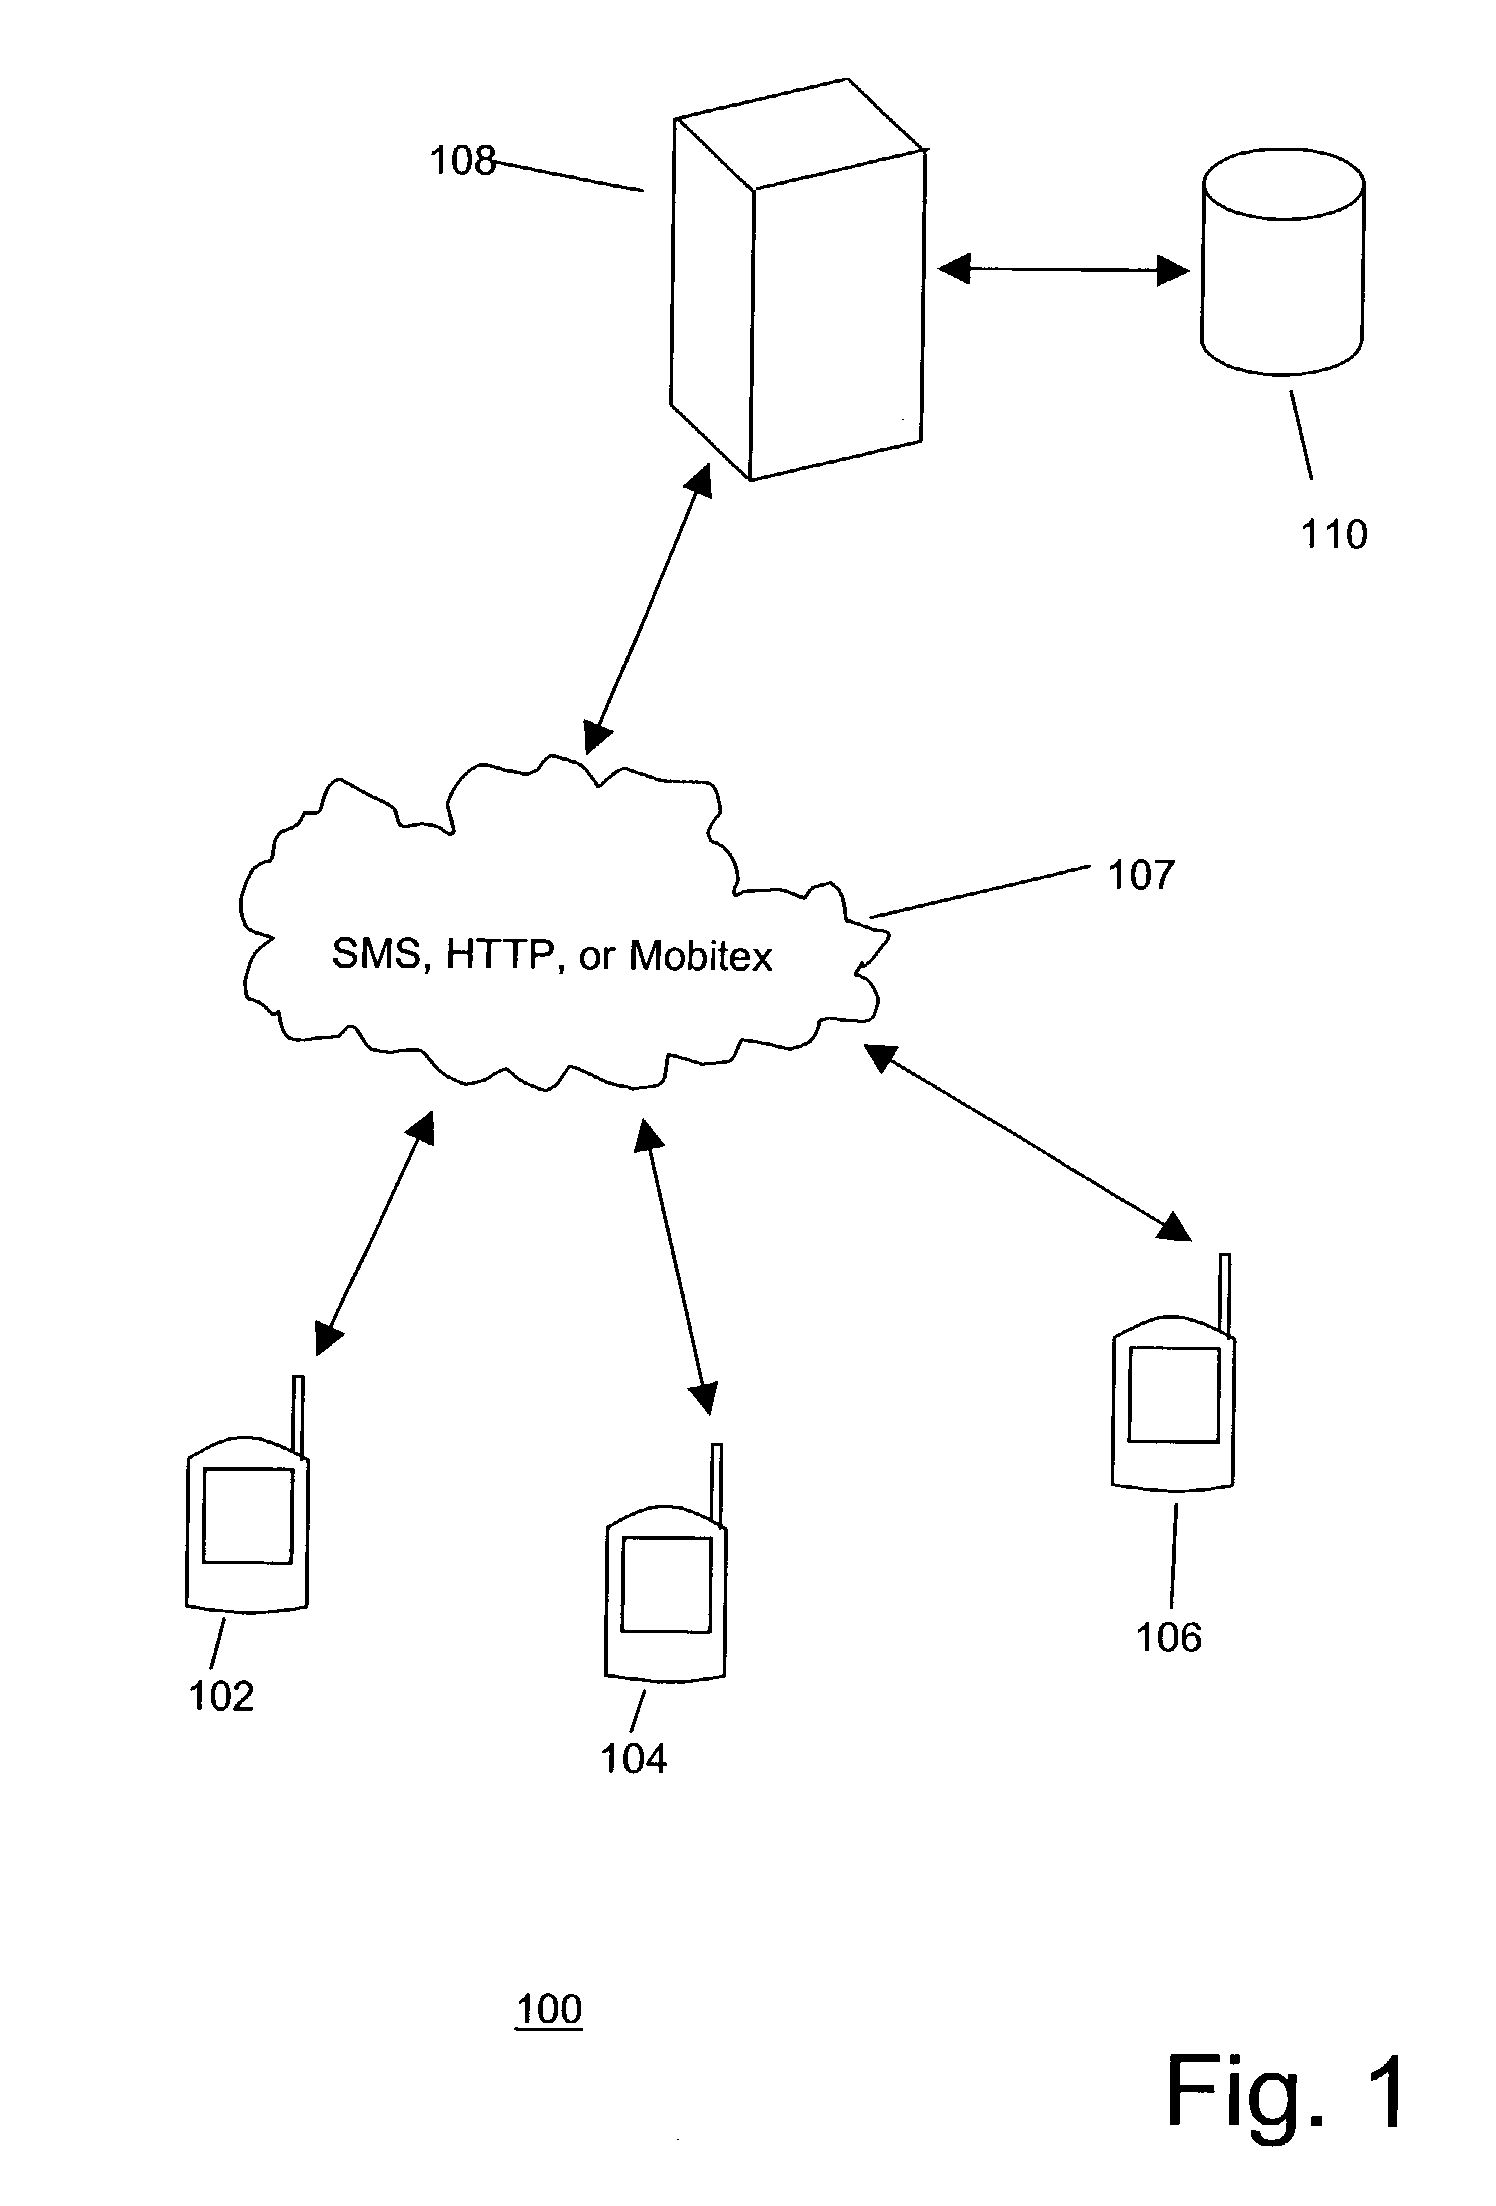 System and method for notifying mobile devices based on device type and network capabilities